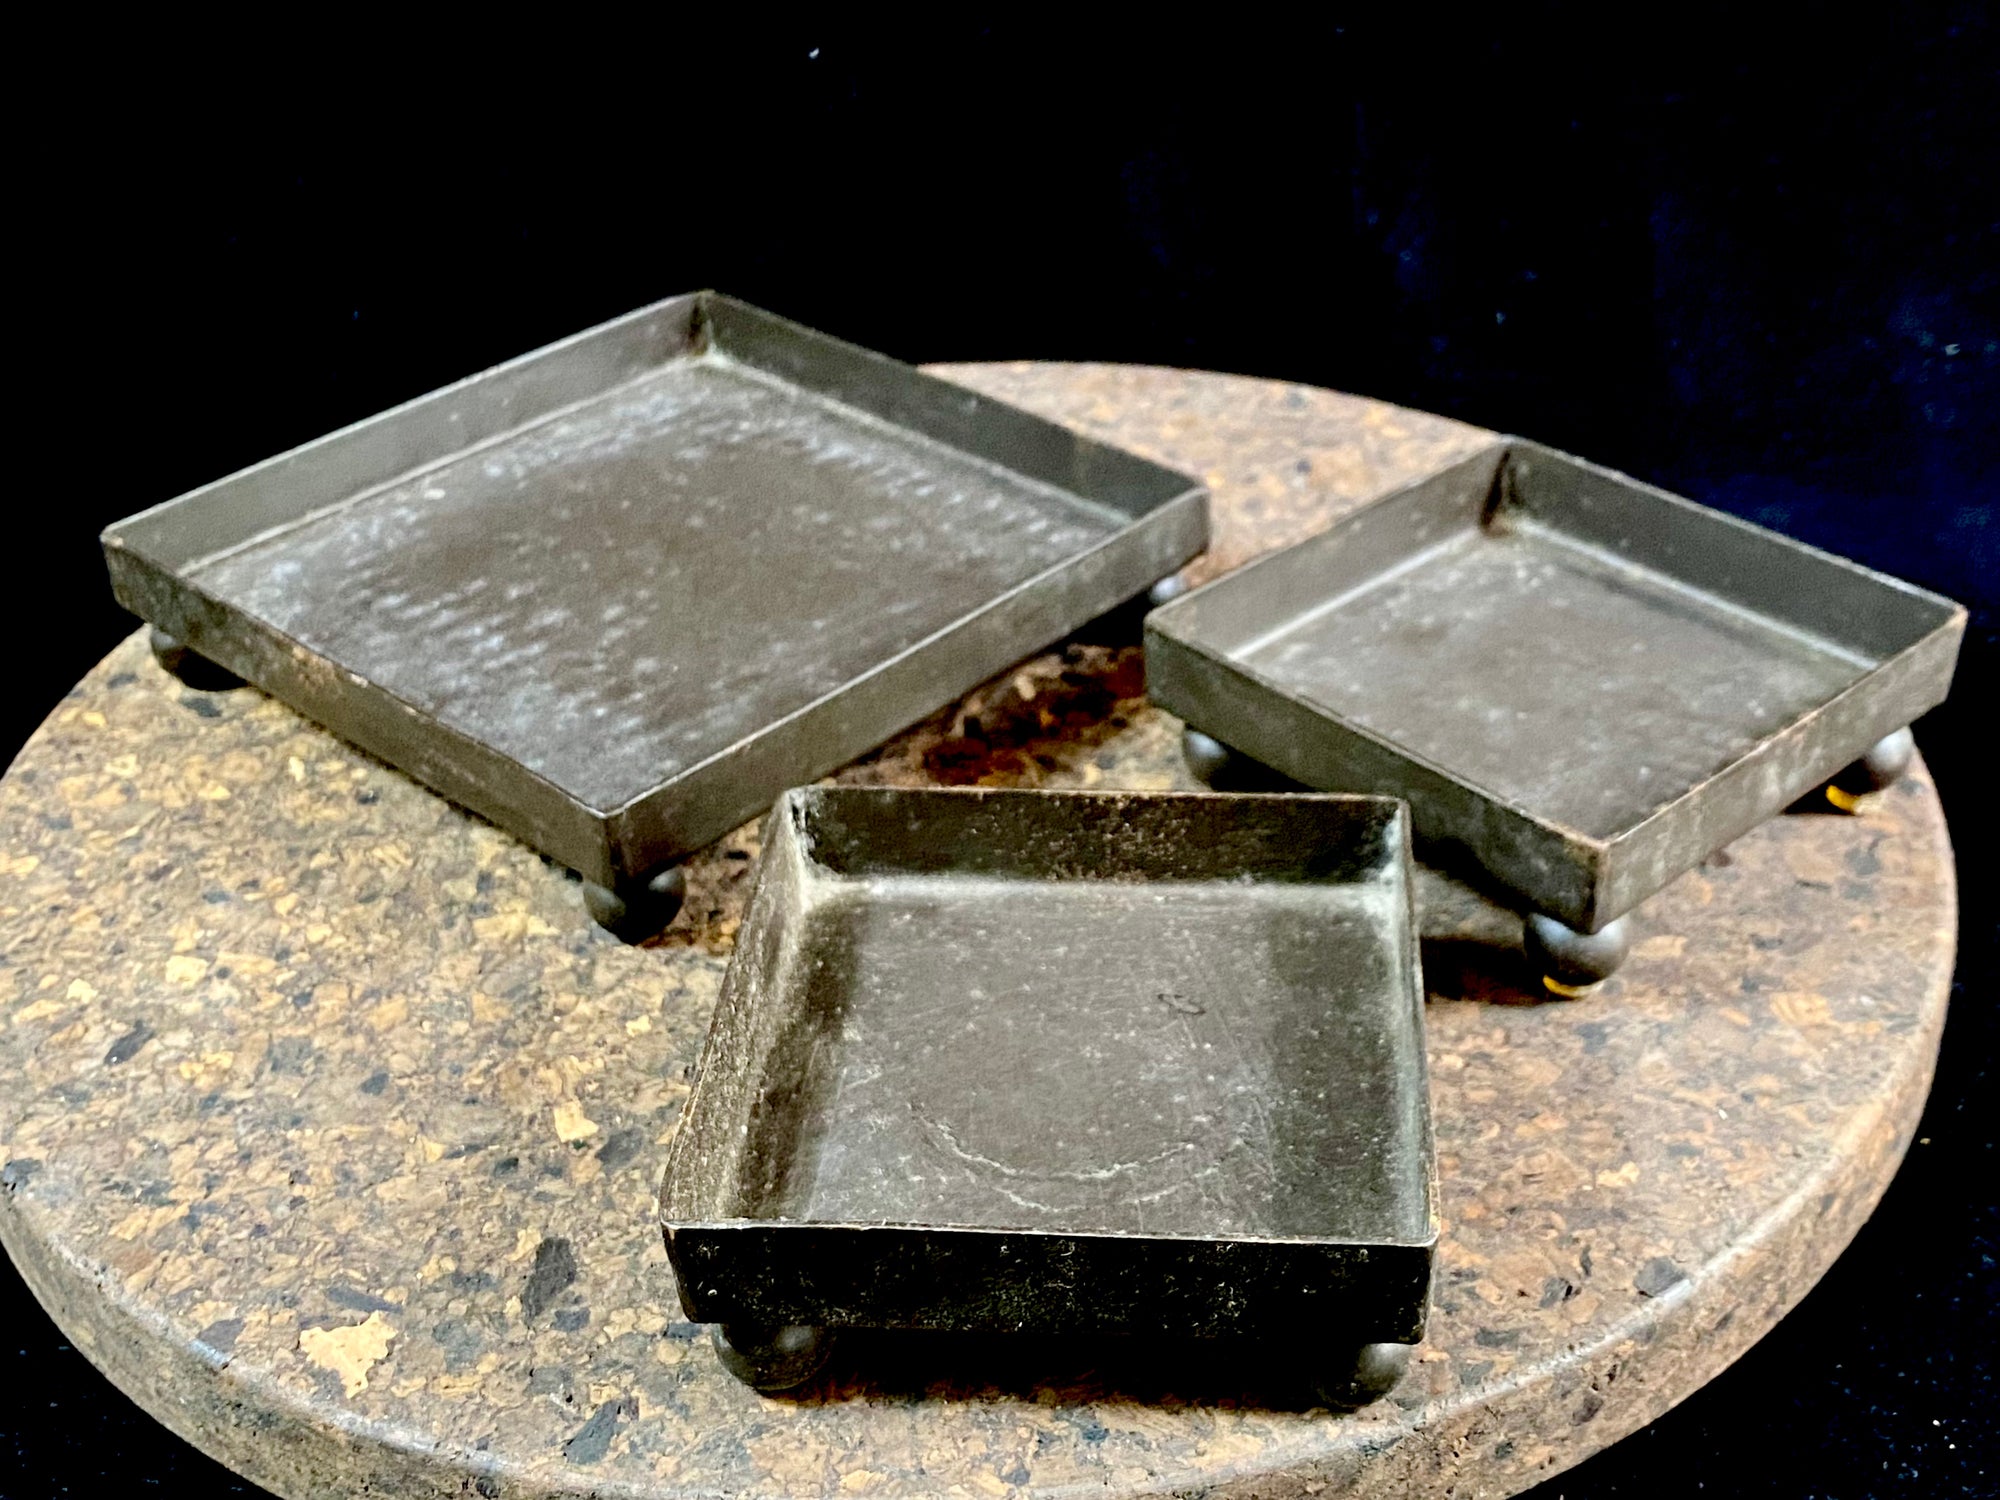 Black iron, footed candle trays